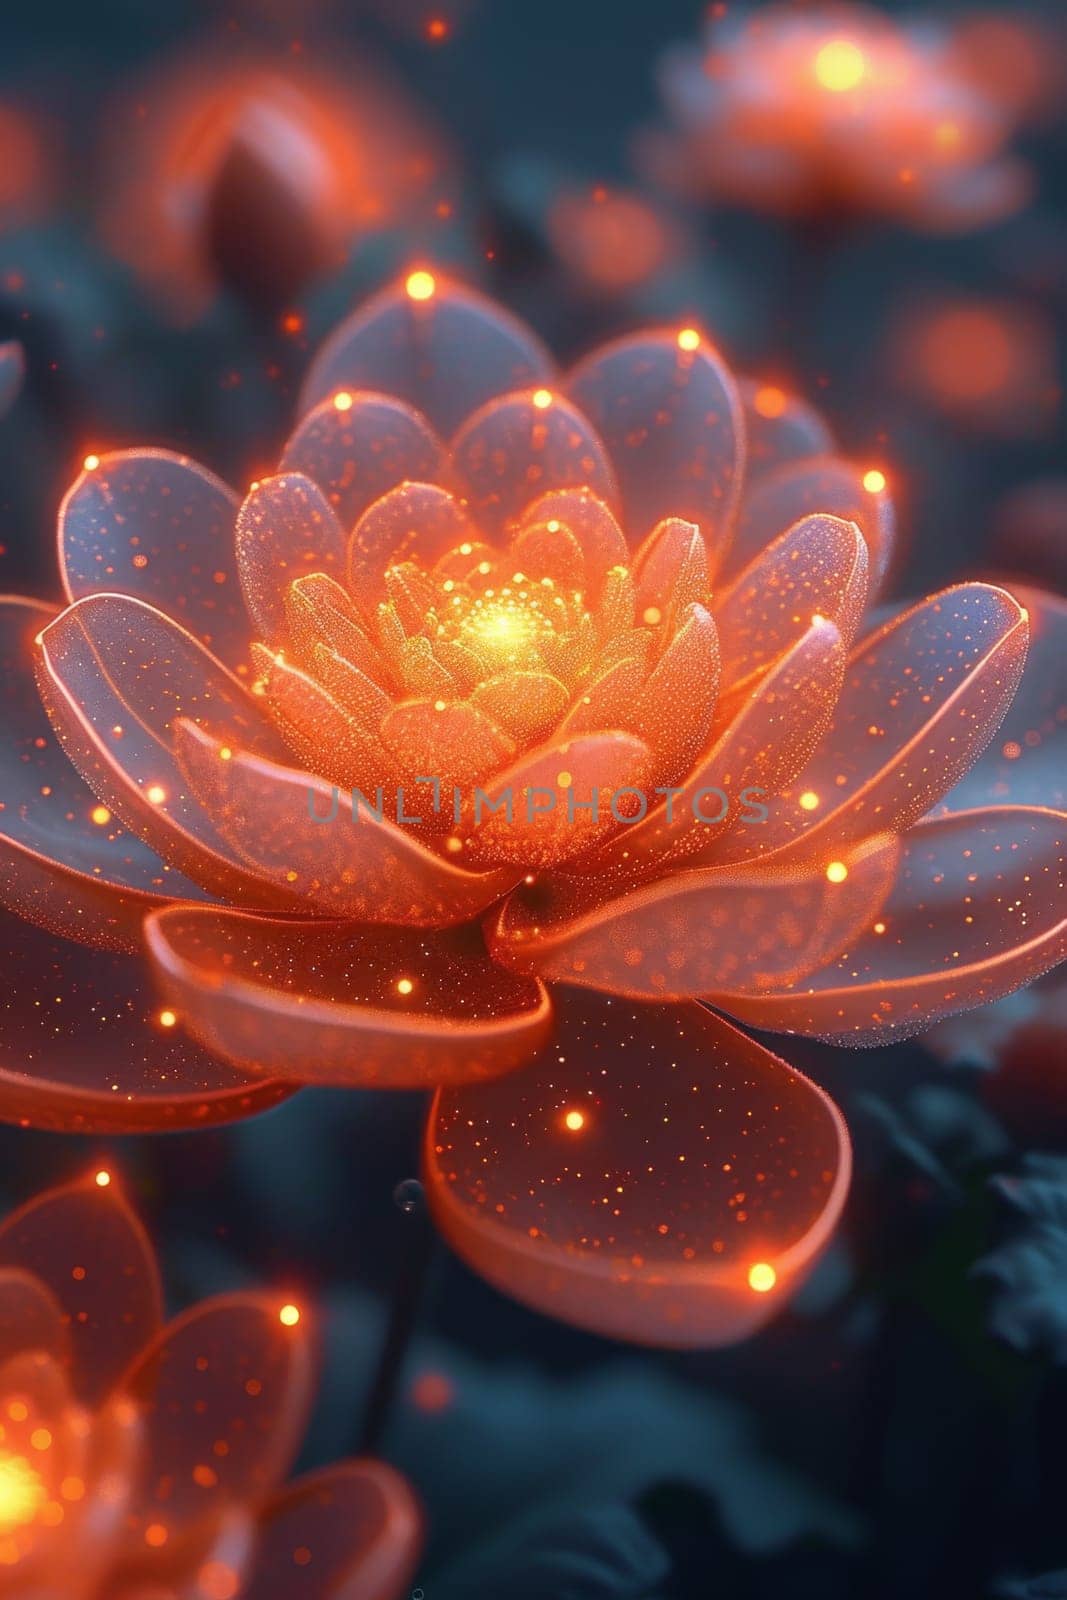 Abstract pink flower with petals. 3d illustration by Lobachad